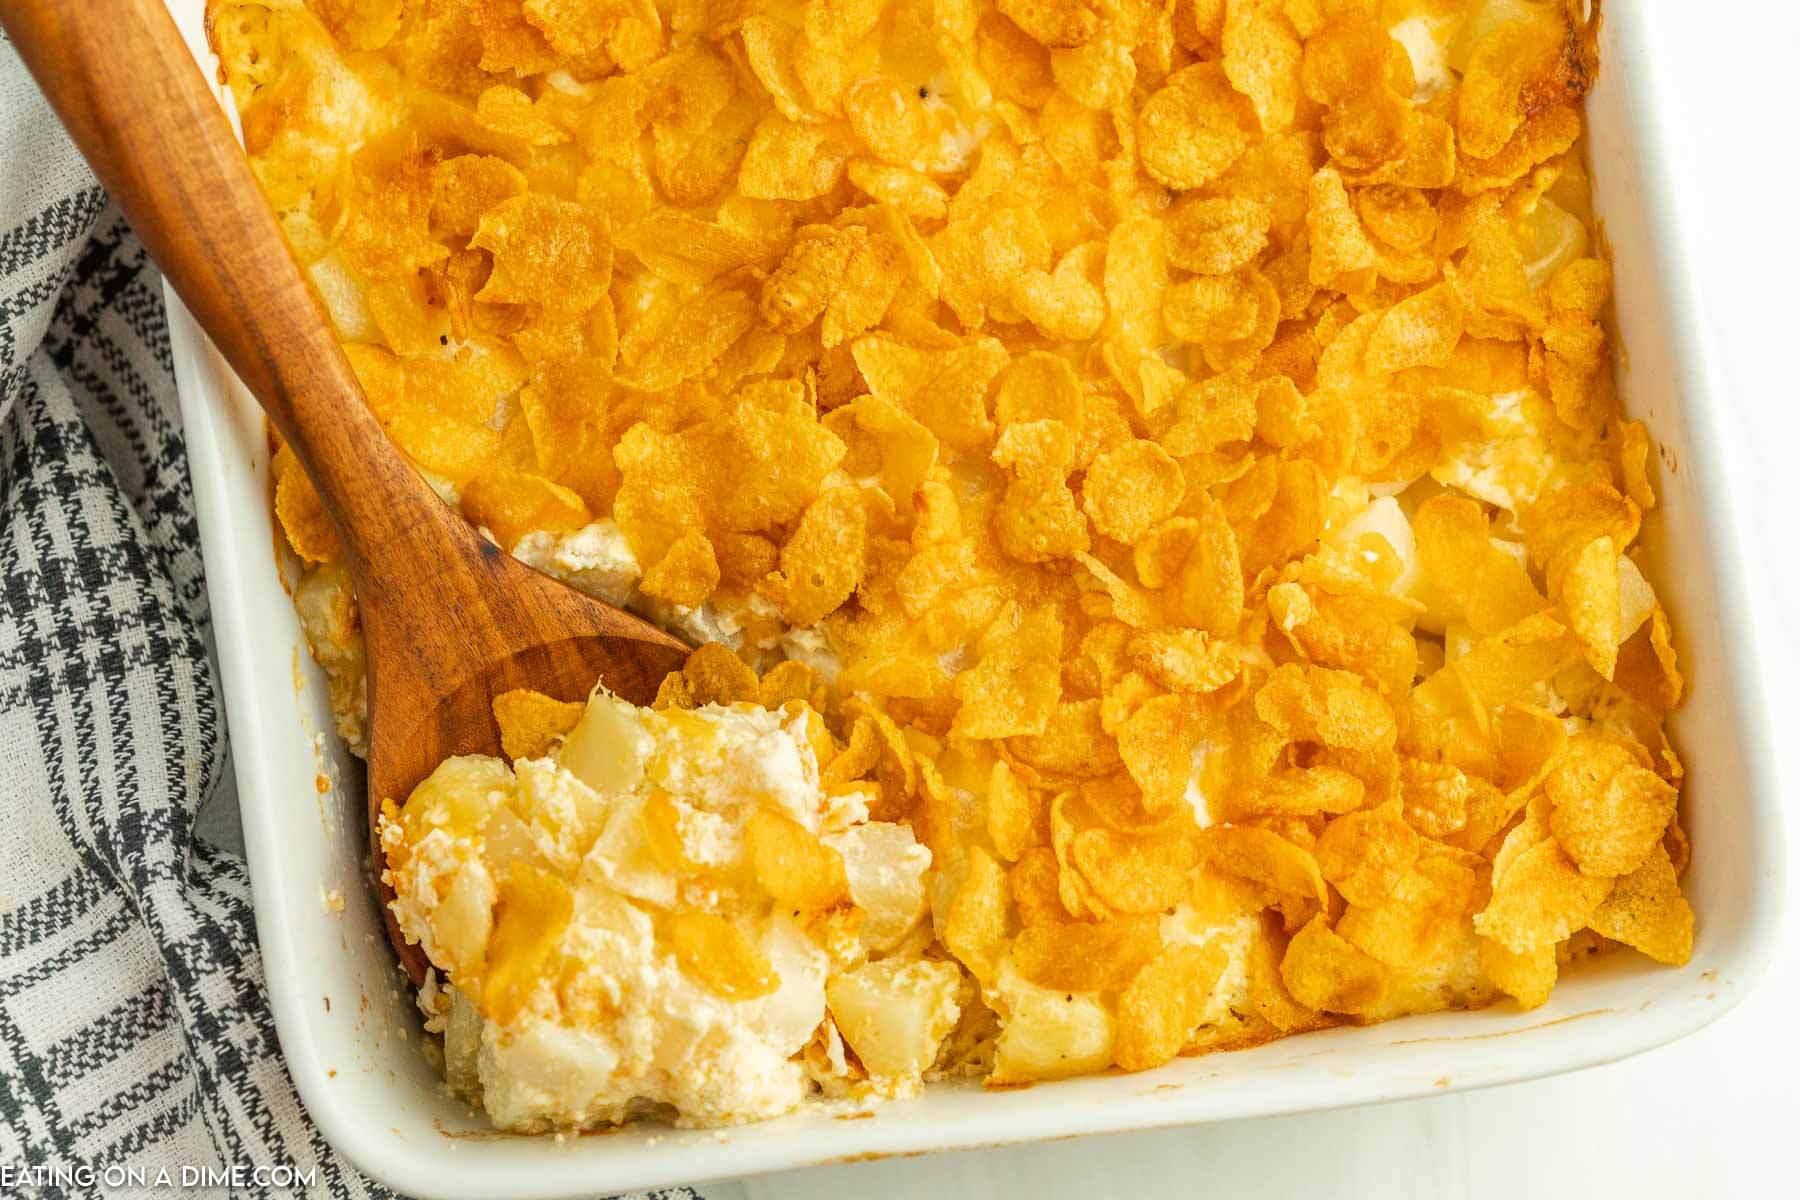 funeral potatoes in a casserole dish with a wooden spoon